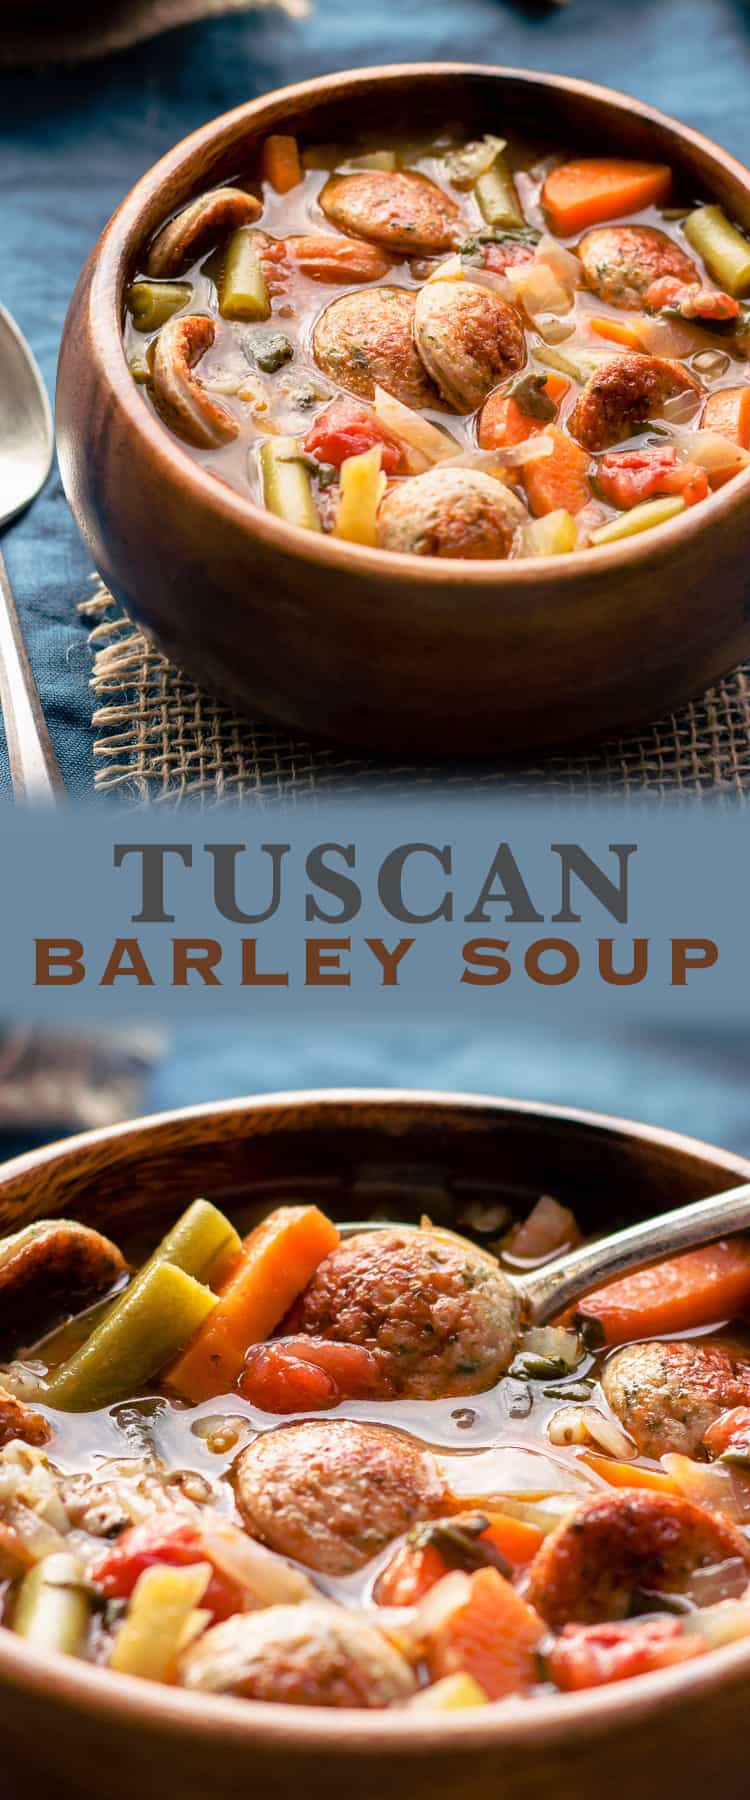 A bowl of food on a plate, with Barley soup